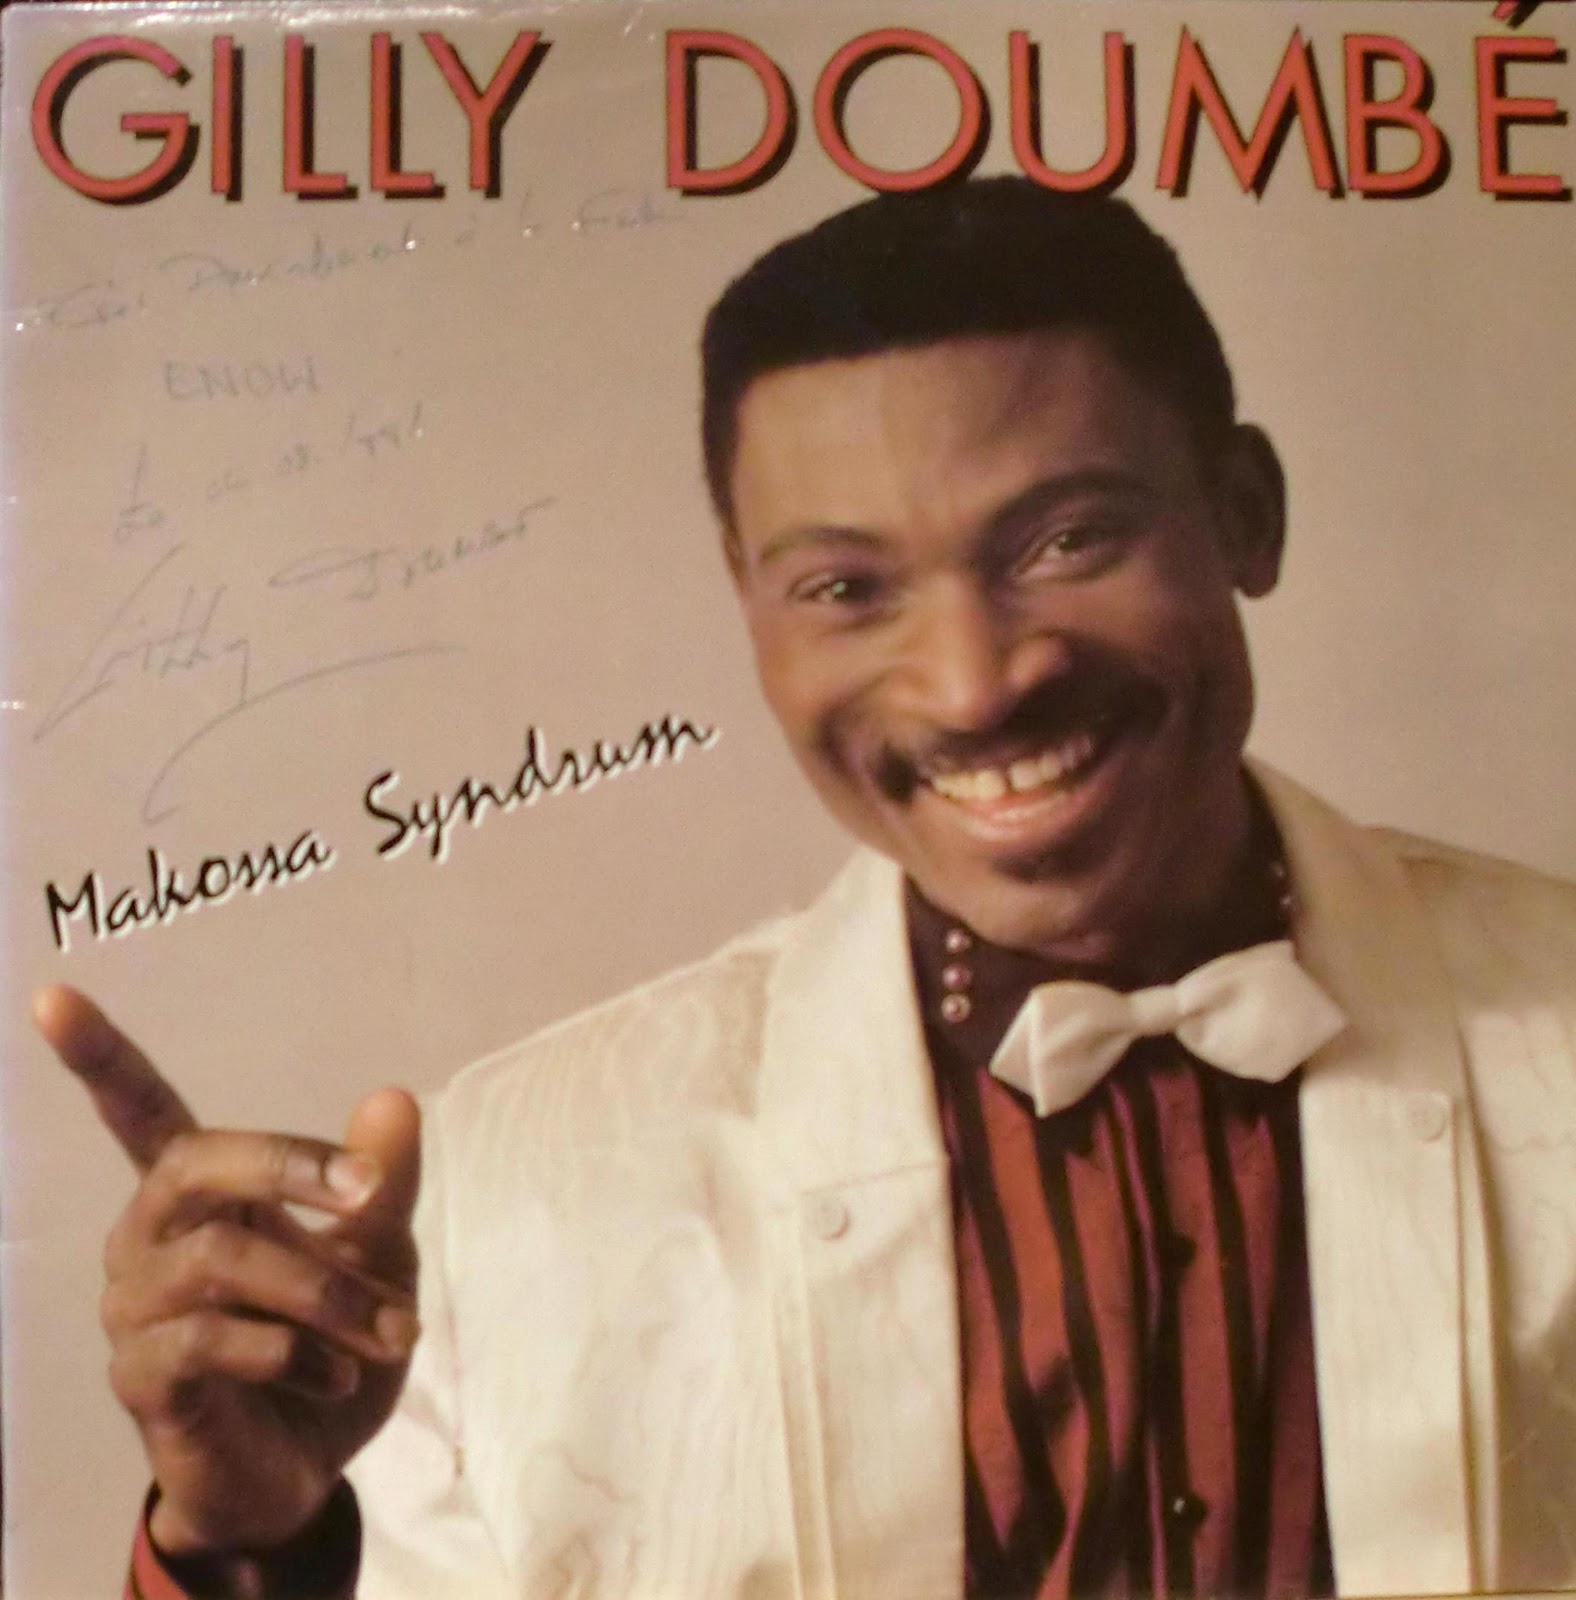 GILLY DOUMBE